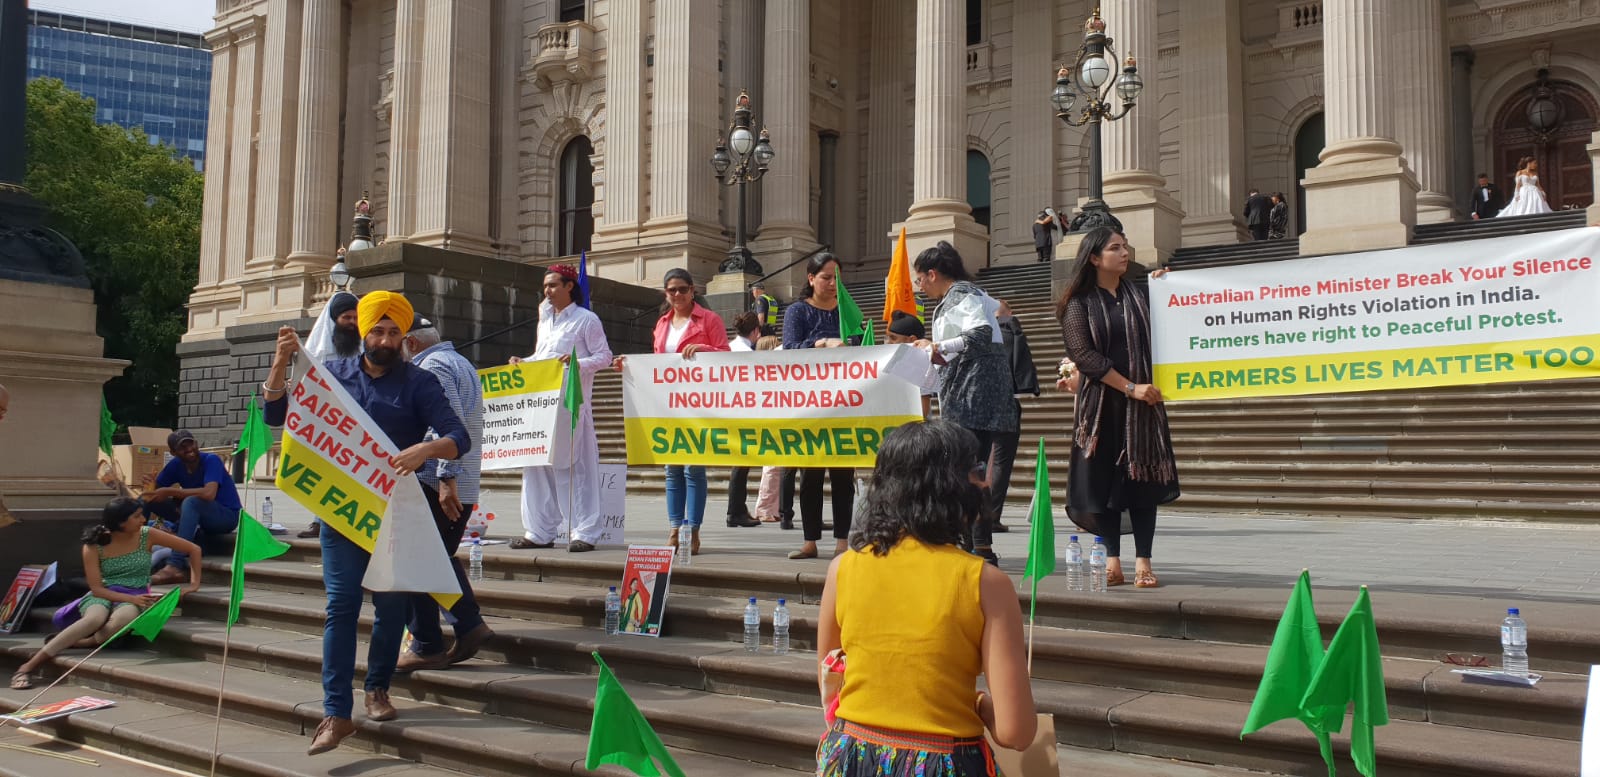 An Australian solidarity protest with farmers in India